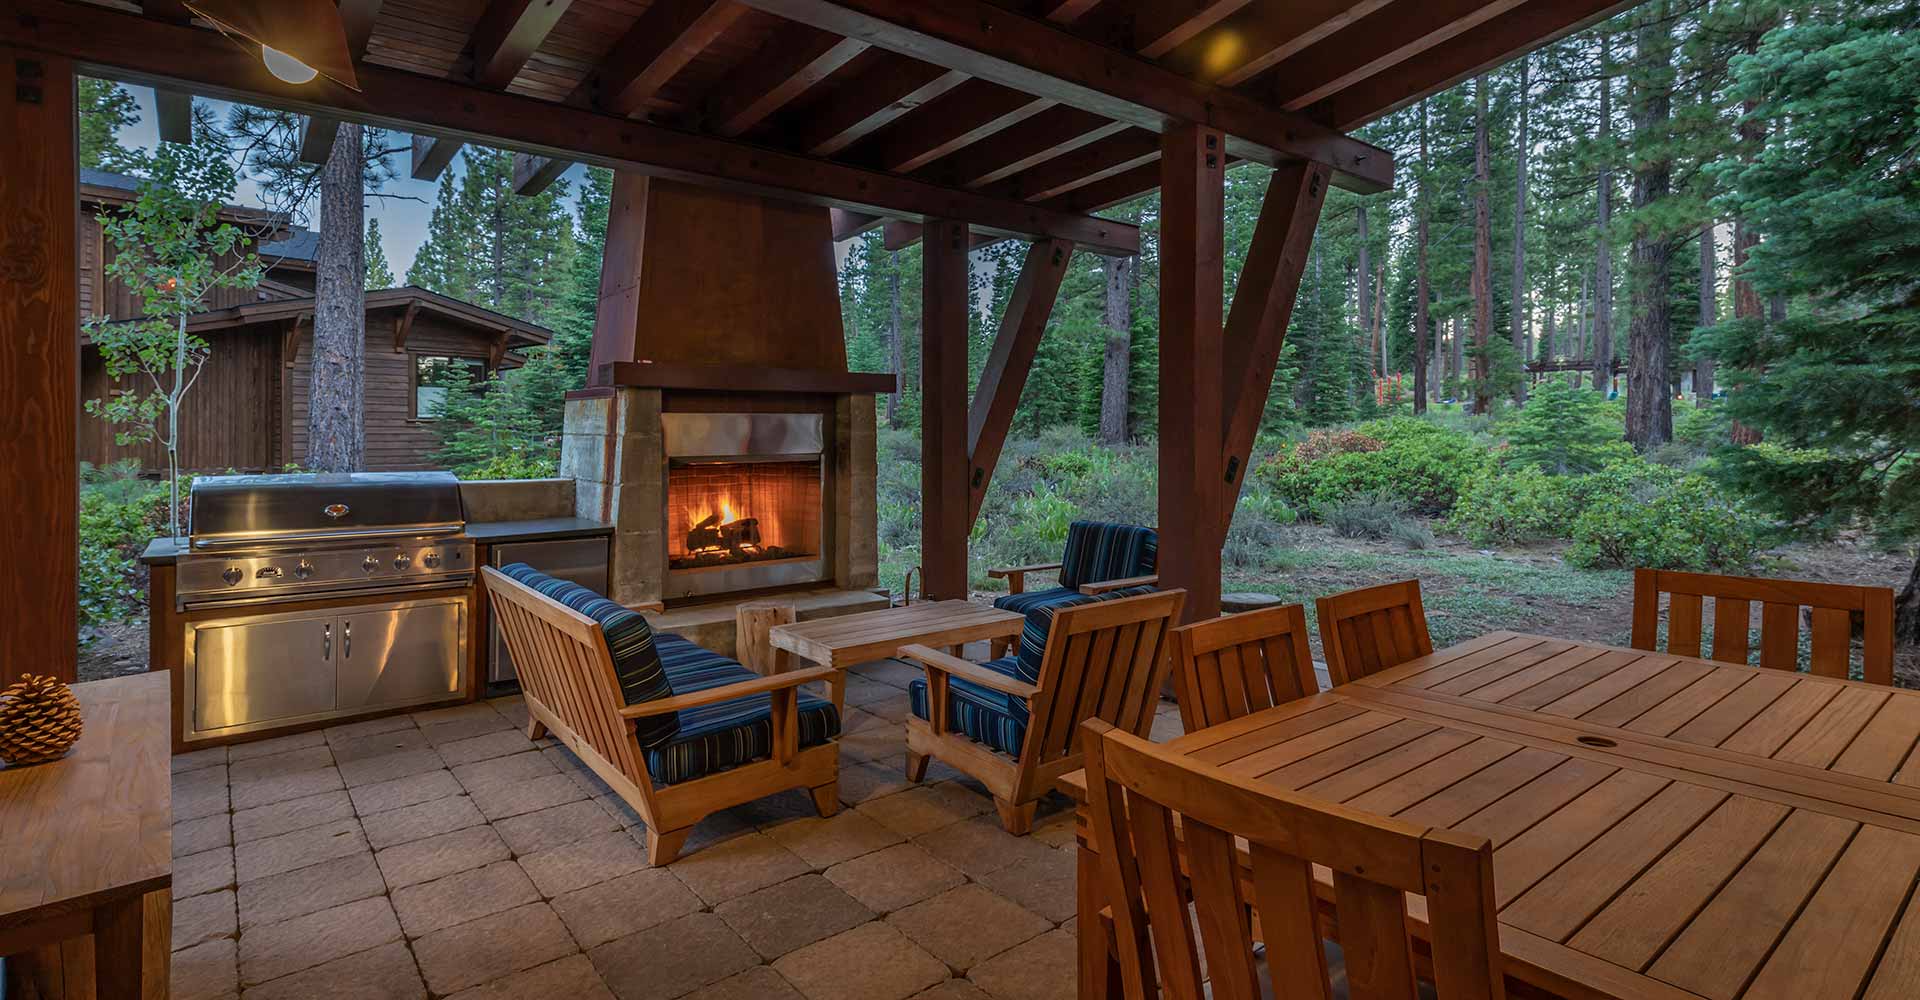 Truckee Luxury homes for sale - 8225 Olana Court